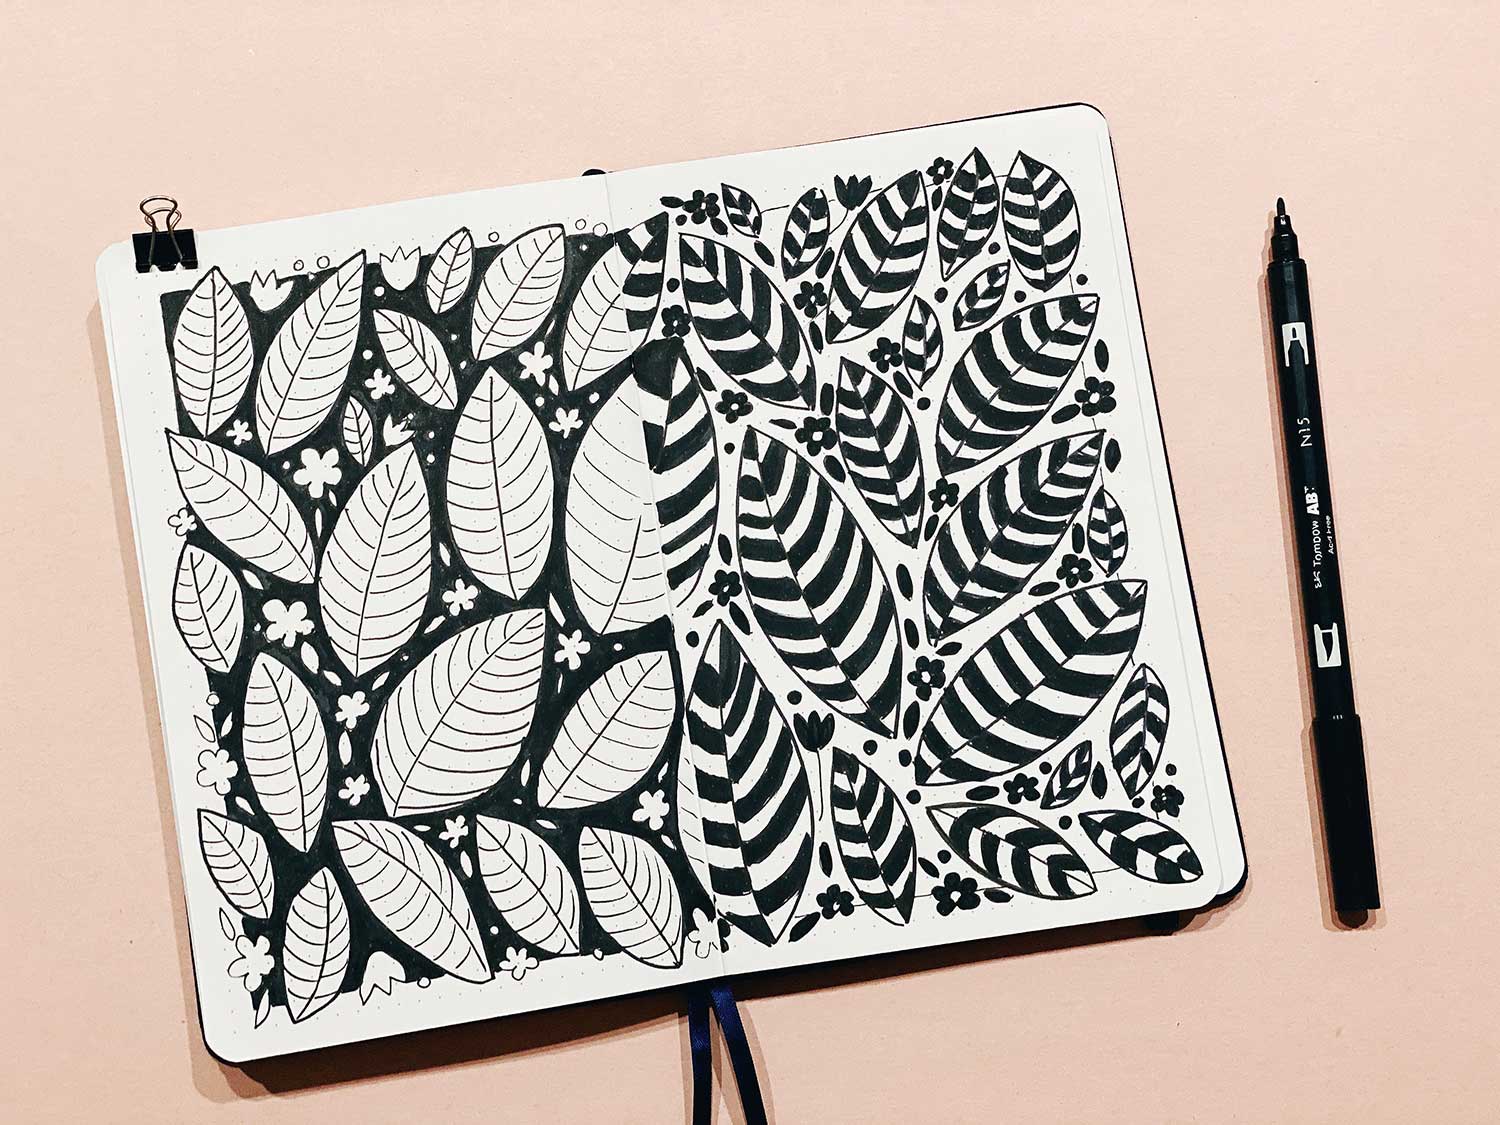 simple creative drawing patterns